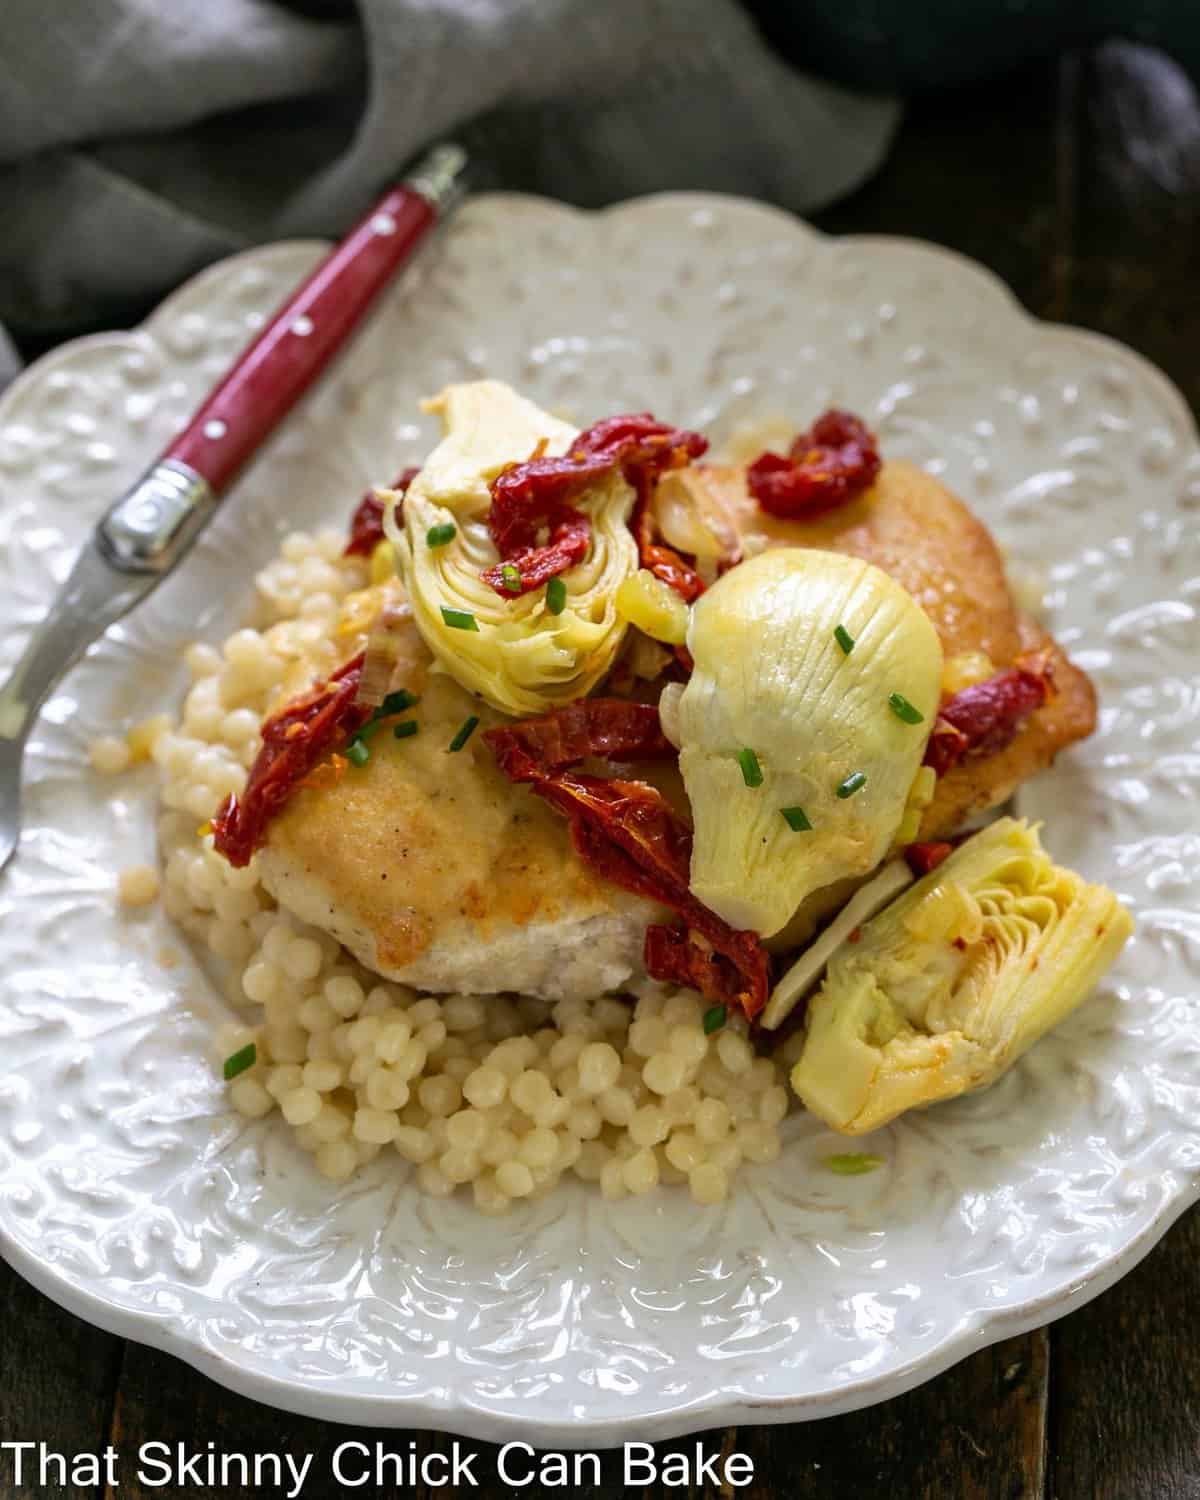 close overhead view of chicken with artichokes and sundried tomatoes over couscous on a white plate with a red handled fork.